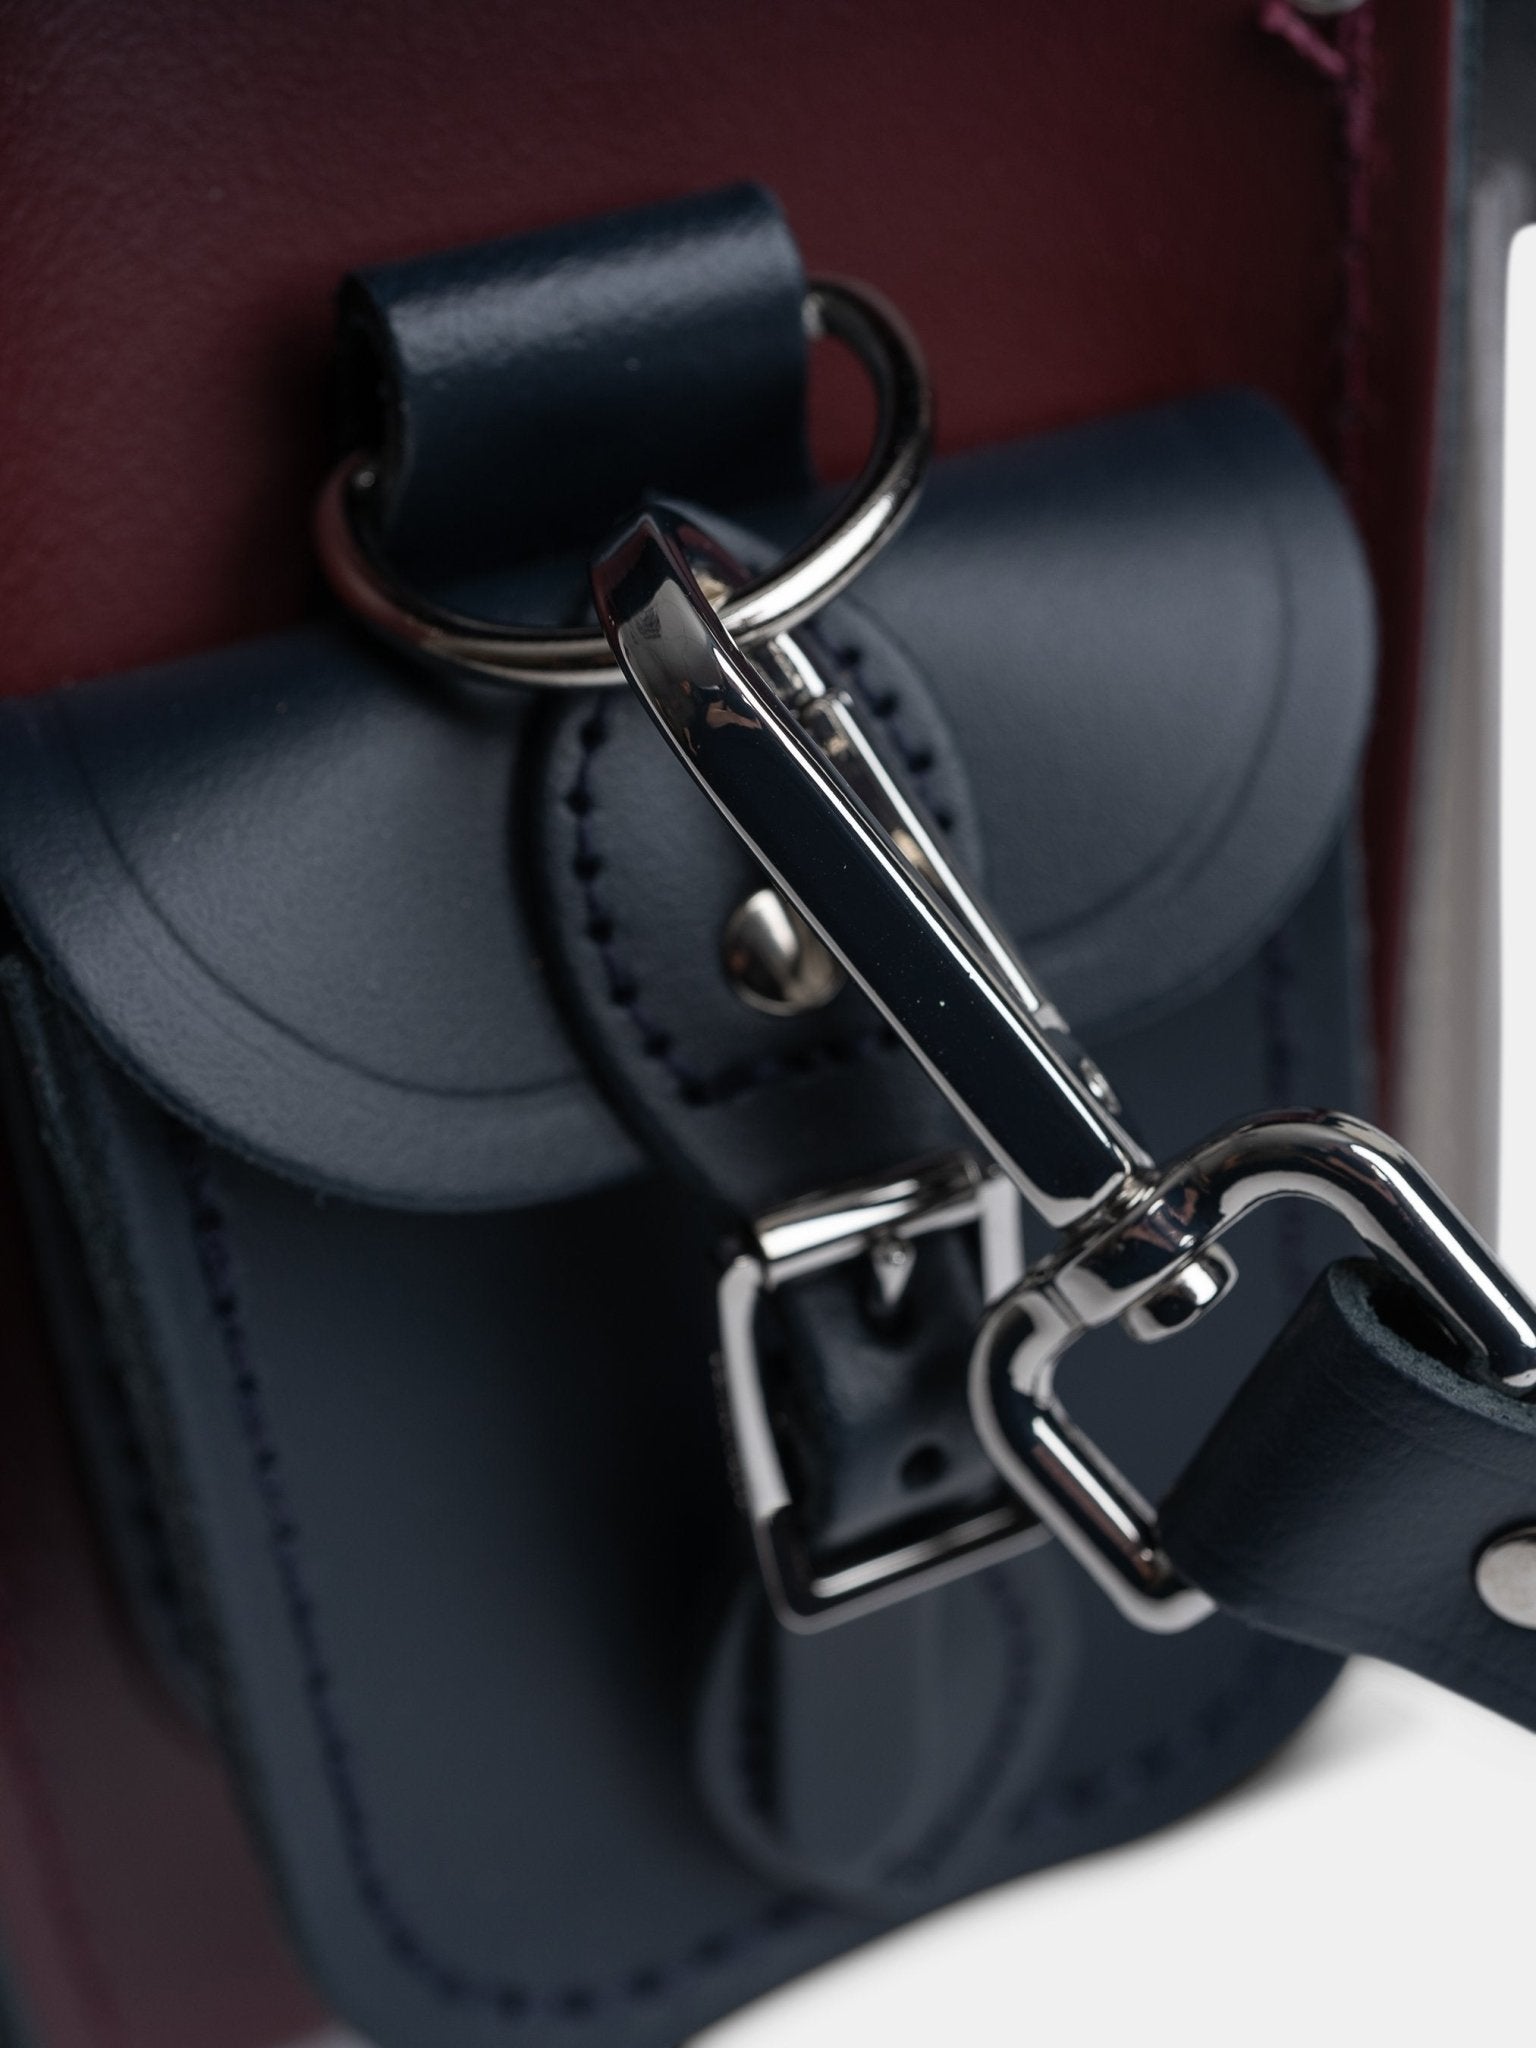 The Traveller - Clay, Oxblood & Navy - The Cambridge Satchel Company US Store